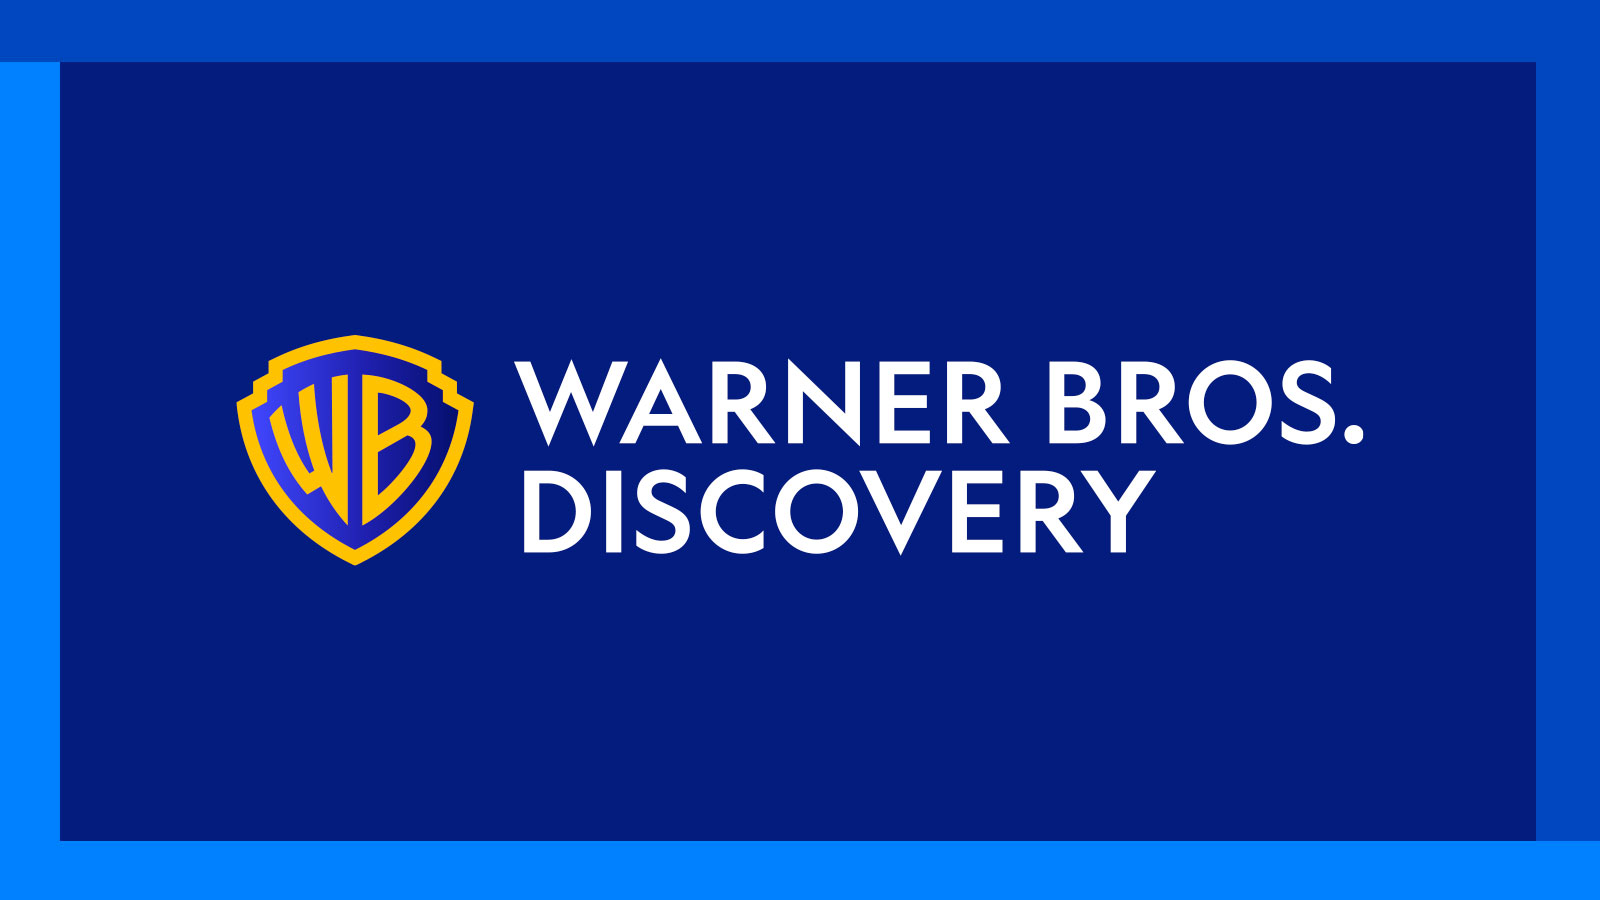 Explore the Unknown Underground in &ldquo;Sewer Divers&rdquo; Premiering on Discovery Channel Jan. 1, 2023 | Warner Bros. Discovery